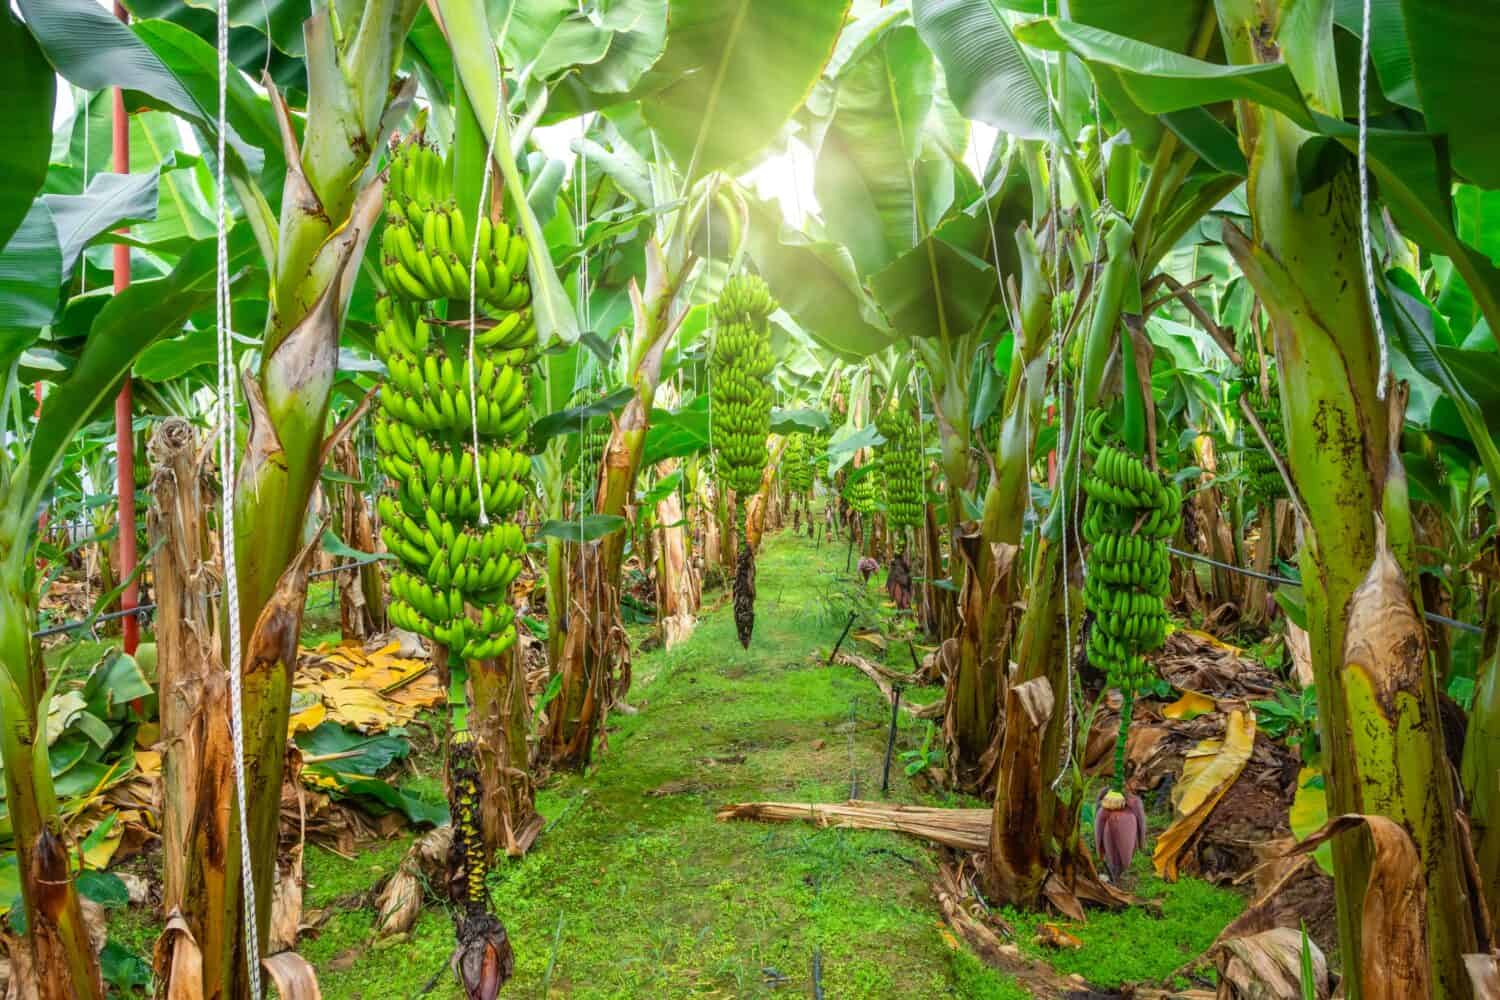 Ecuador banana farms and plantations inside greenhouses. Banana grass grown on an industrial scale. Palm trees with bunches of fruits ripening for sale on the market